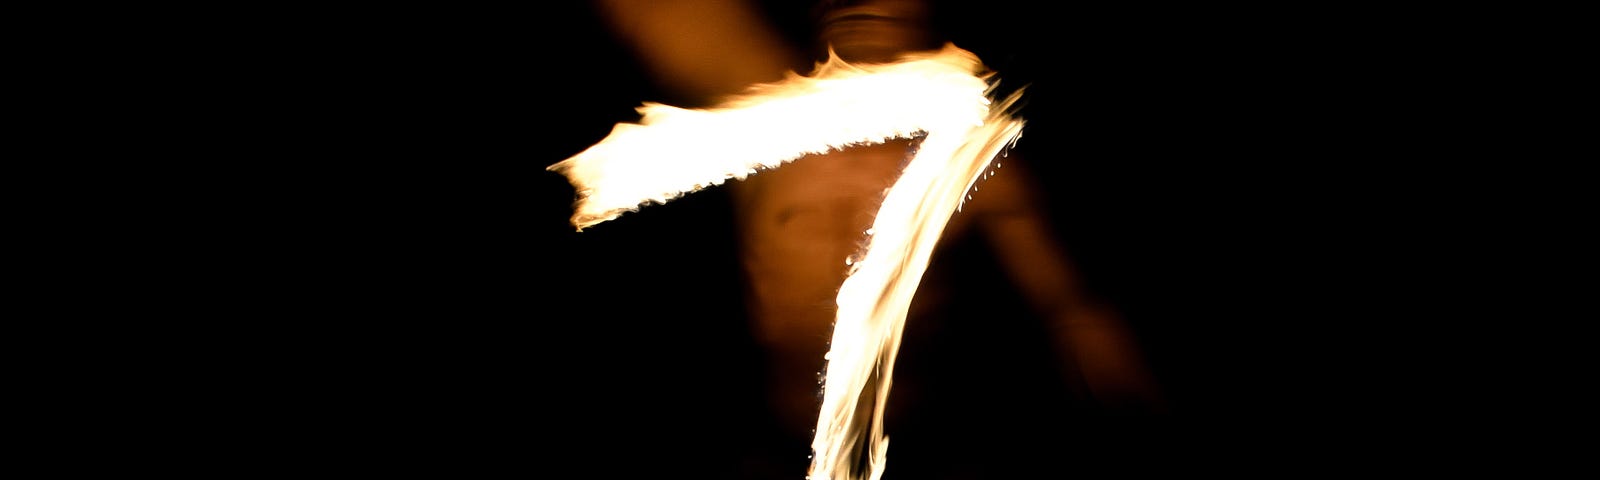 The number 7 made out of fire on a black background